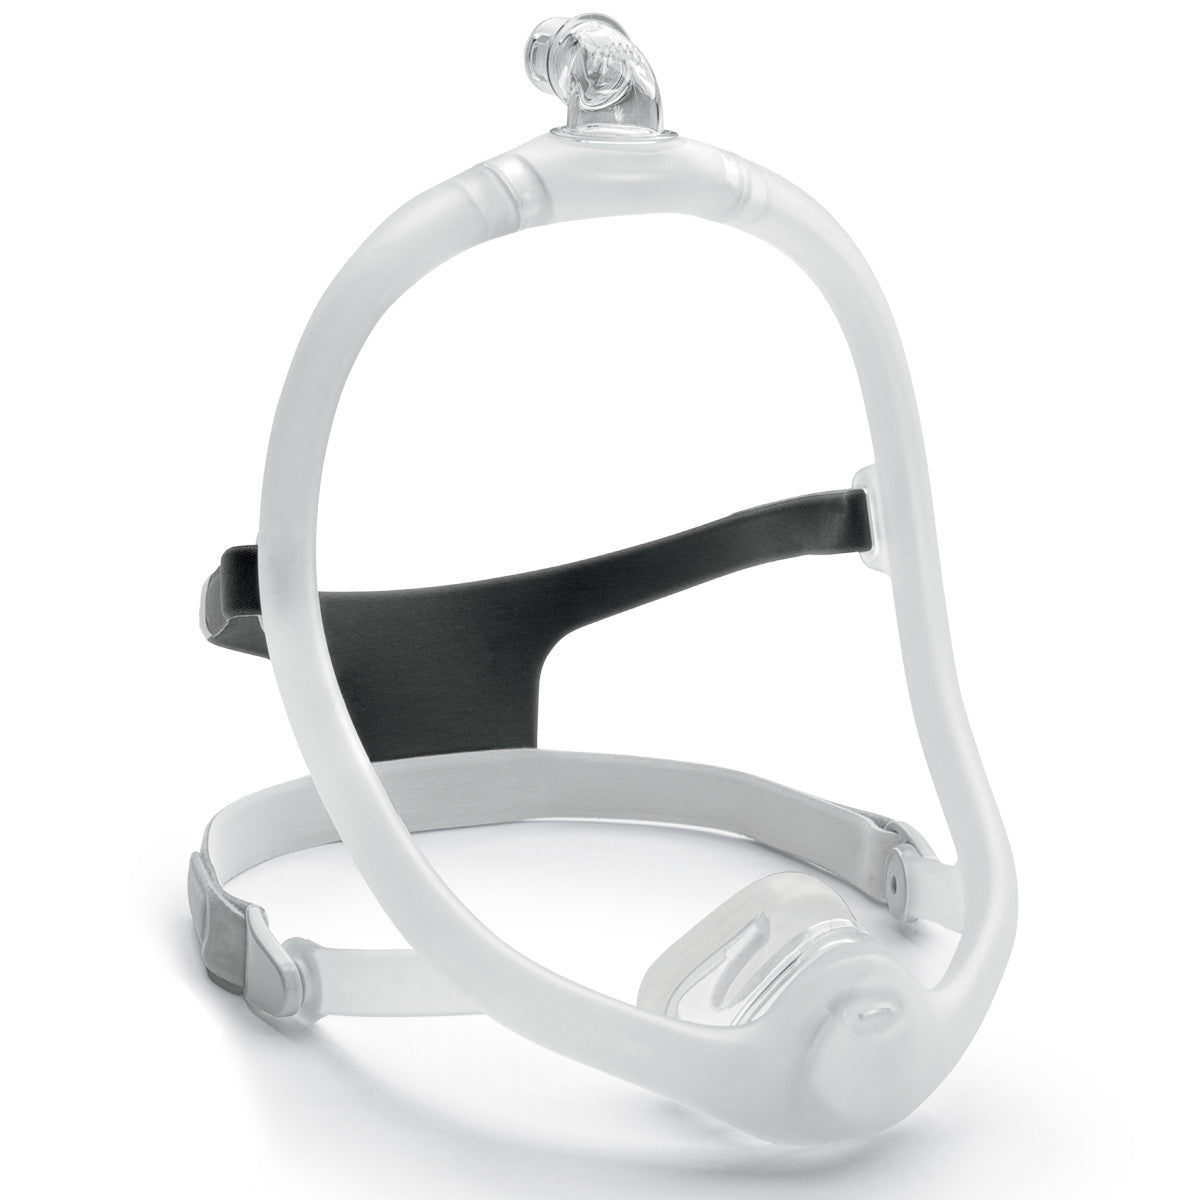 WISP CPAP Mask  Nose mask with silicone frame by Philips Respironics